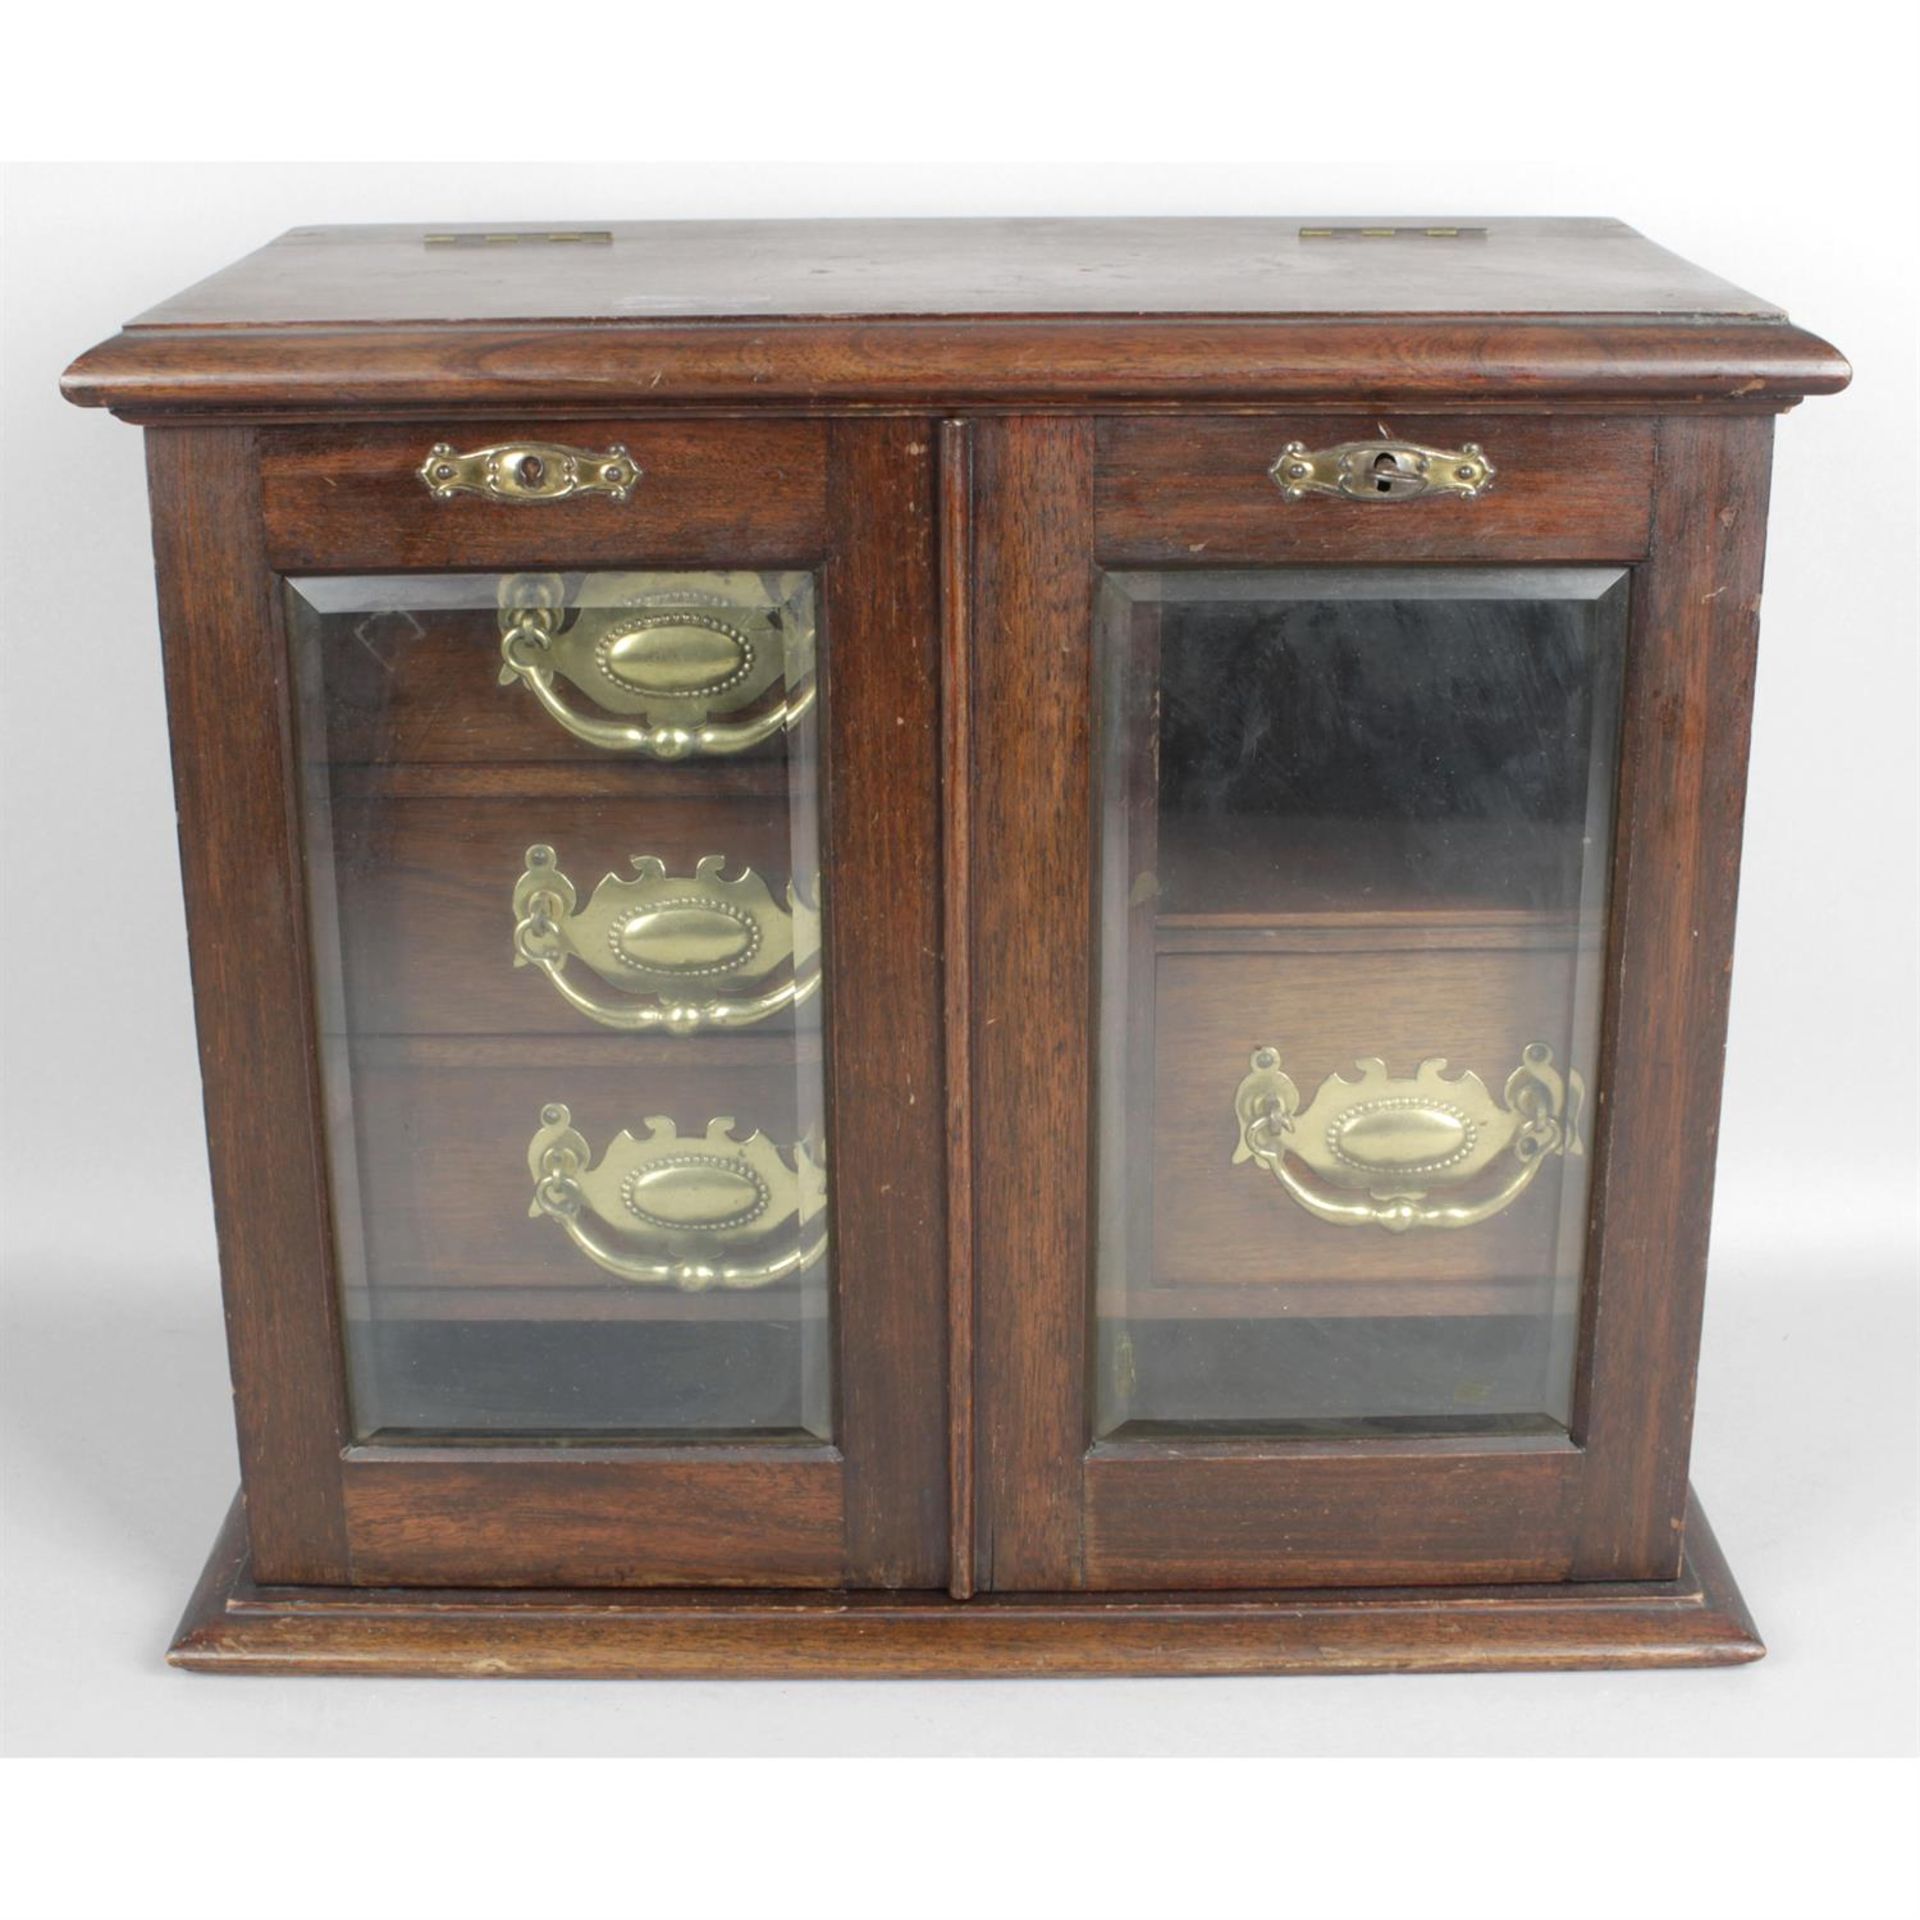 An early 20th century stained mahogany smokers cabinet.